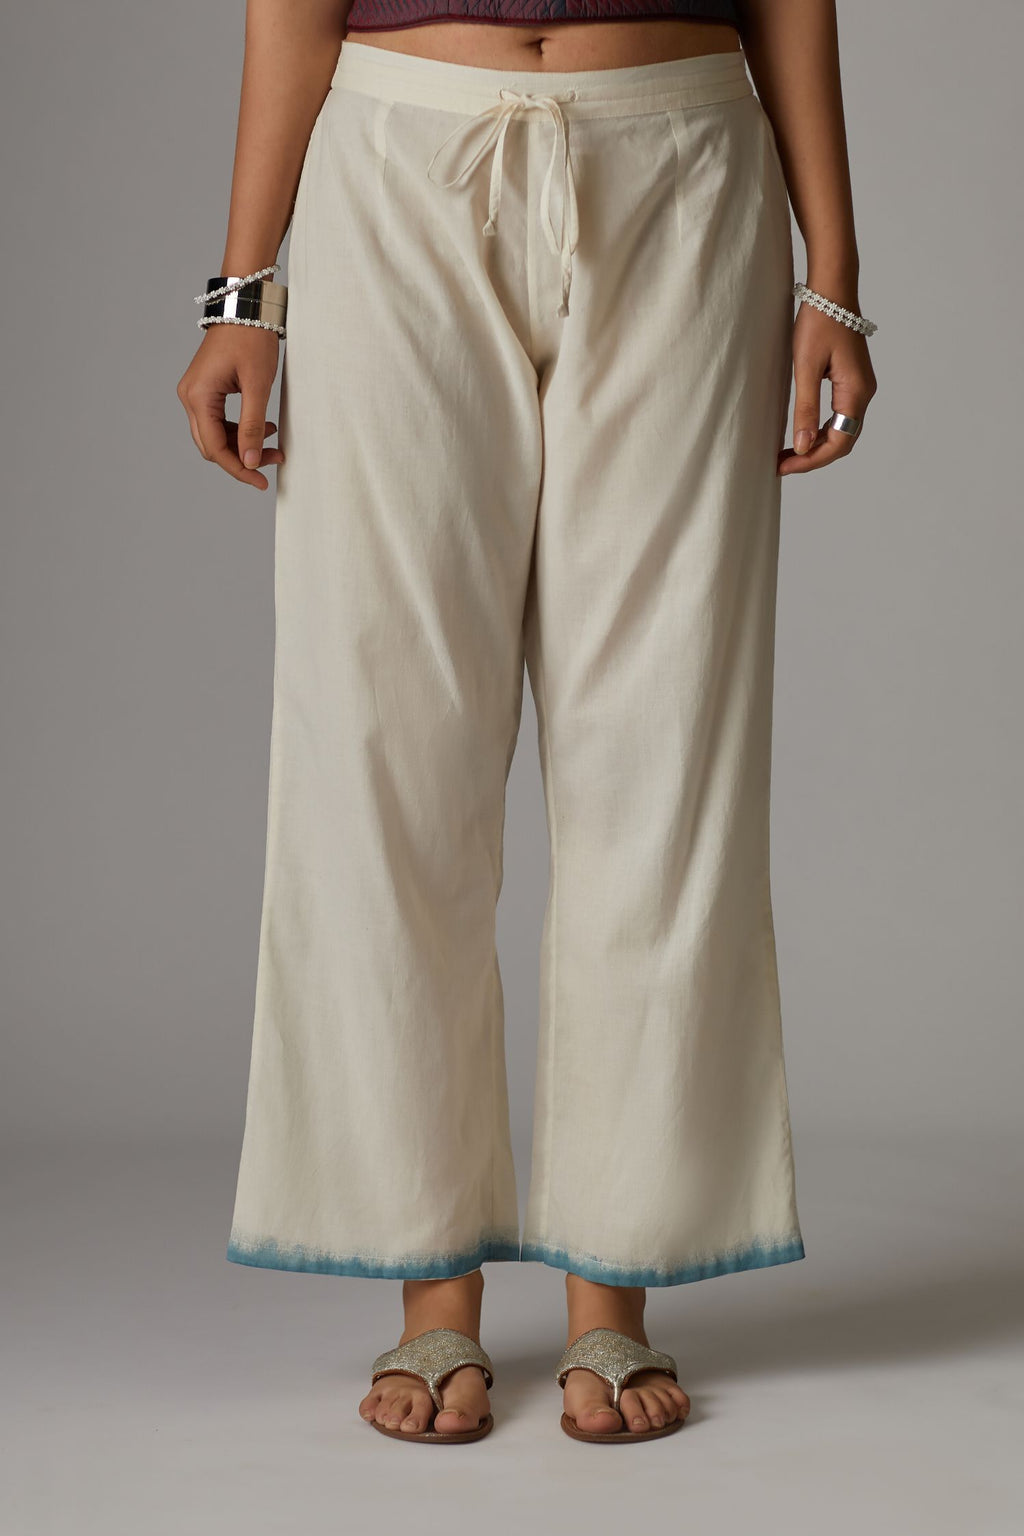 Off white straight pants with hand block print at the bottom